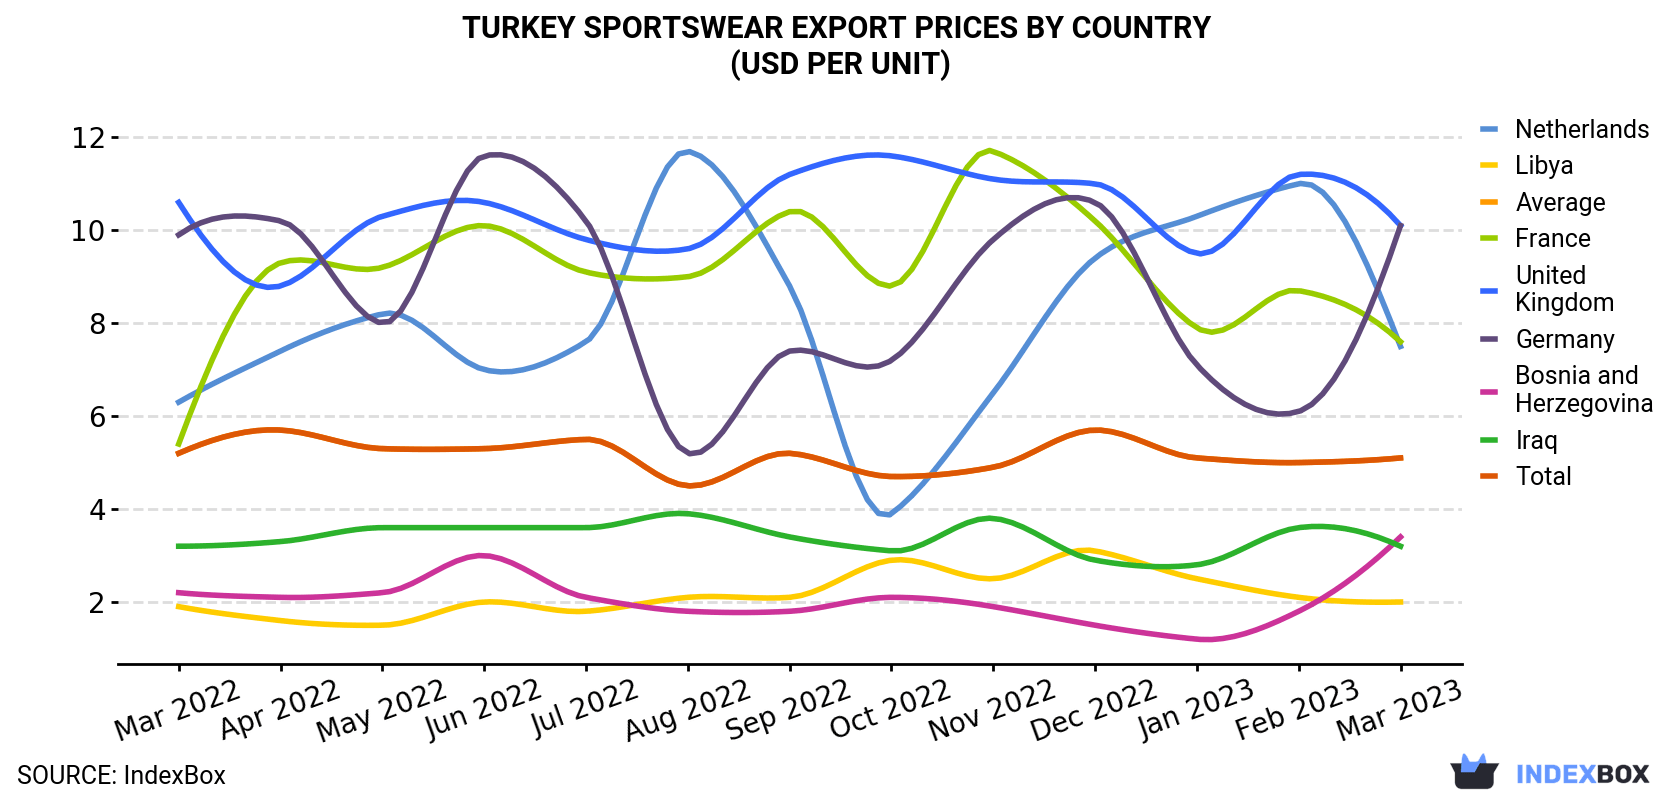 Turkey Sportswear Export Prices By Country (USD Per Unit)